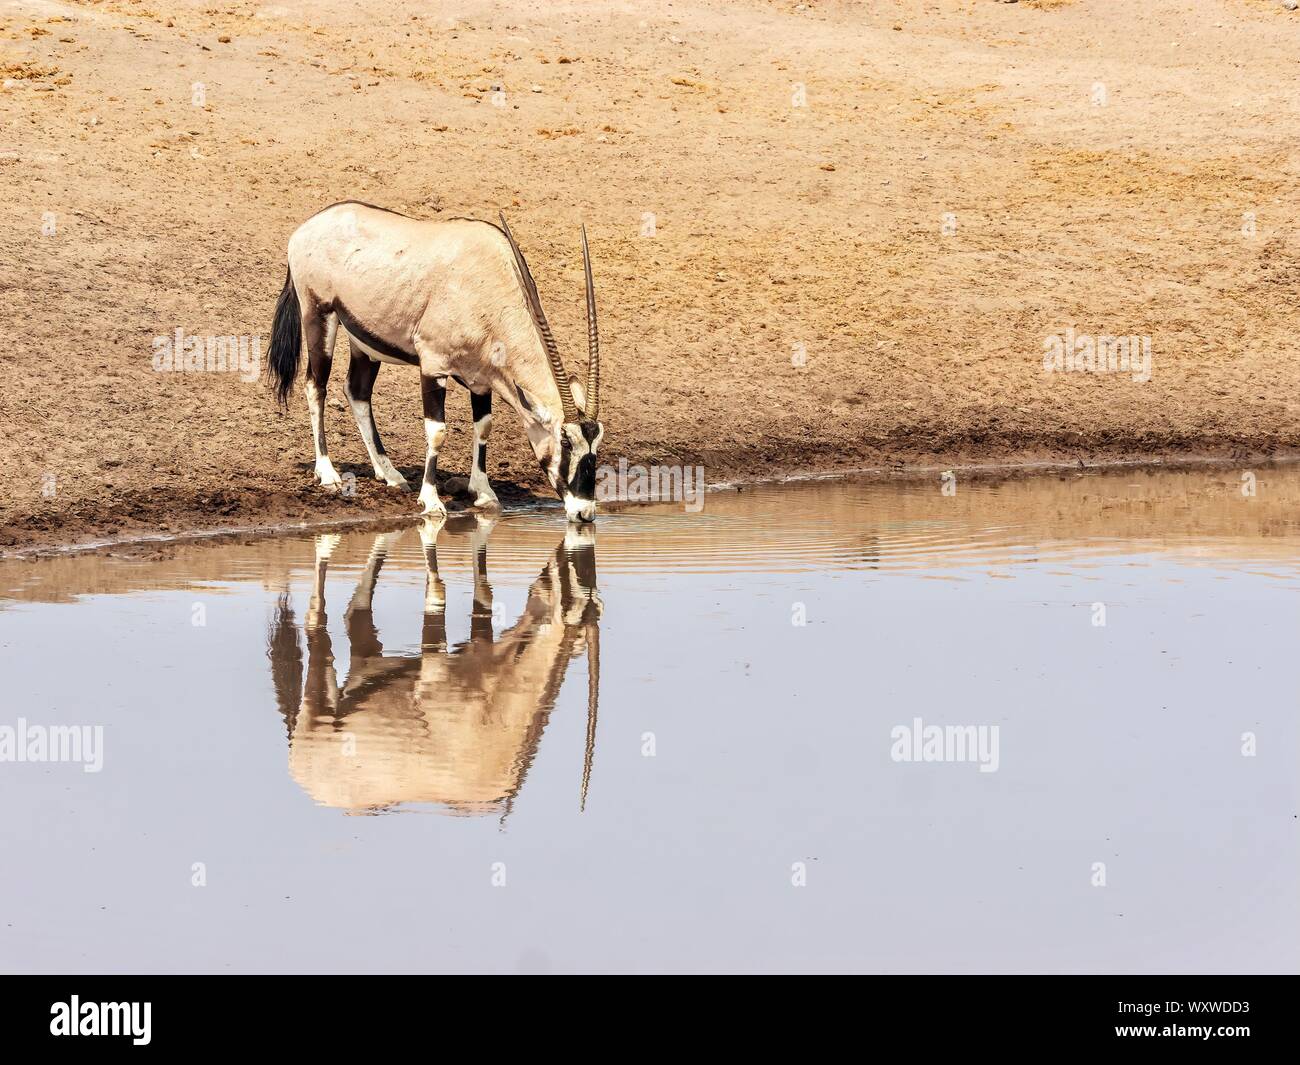 A thirsty oryx drinking from a waterhole in Etosha National Park, Namibia, with his reflection in the water. Stock Photo